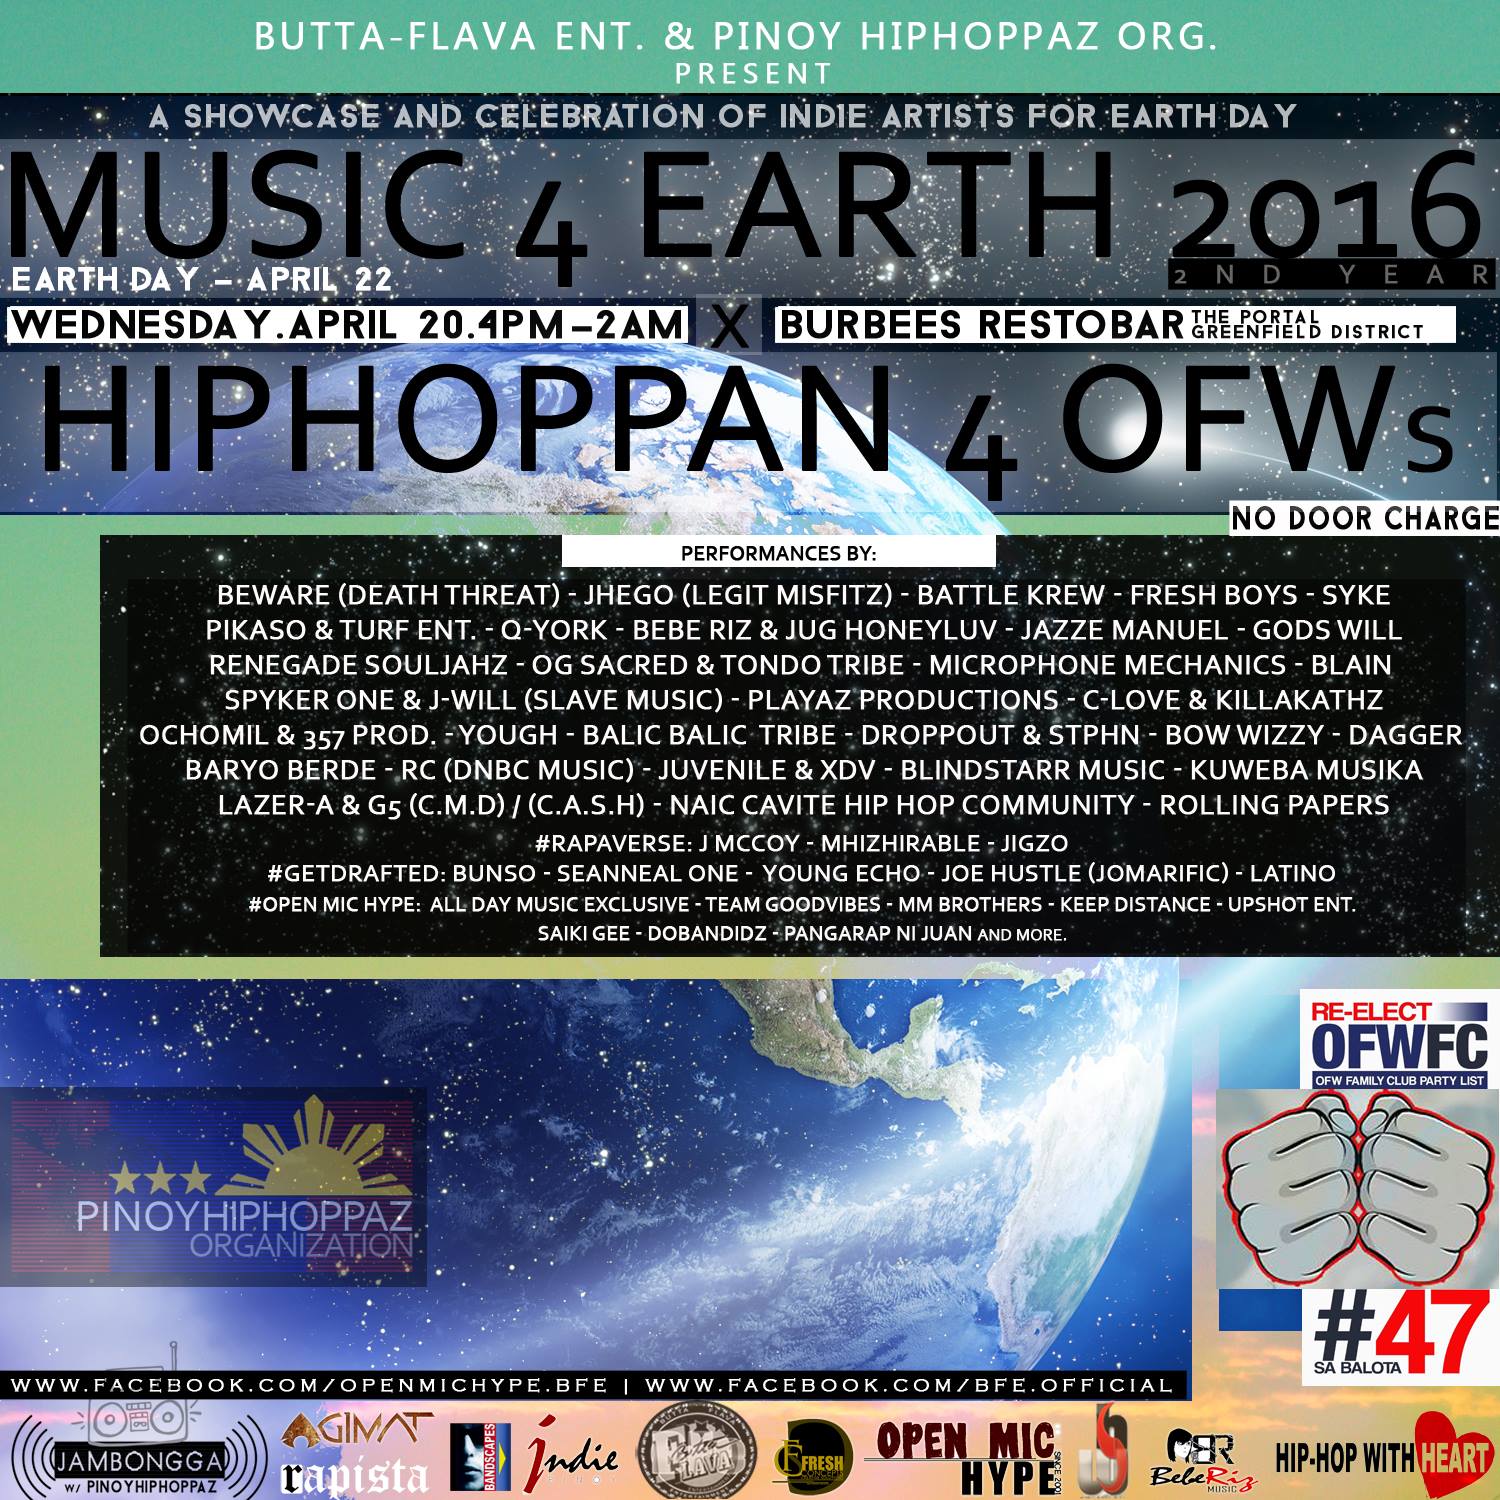 Music4Earth2016 x Hiphoppan4OFWs clock April 20 – April 21 Apr 20 at 4 PM to Apr 21 at 2 AM pin Show Map Burbees Restobar the Portal, Greenfield District,mandaluyong City Mandaluyong envelope Invited by Jug Honeyluv Ramos About Discussion Details The Pinoy Hiphoppaz Organization www.facebook.com/phh.org & Butta-Flava Entertainment www.facebook.com/BFe.Official Present Music4Earth2016 x Hiphoppan 4 OFWs (A Joint Event for 2 Great Causes) 1) Music 4 Earth 2016 (#Music4Earth2016): [A Showcase and Celebration of Indie Artists for Earth Day, an annual global campaign to encourage awareness of the growing problems of air, water and soil pollution.] and 2) Hiphoppan 4 OFWs (#Hiphoppan4OFWs) [A Night of Music 4 the OFW FAMILY CLUB PARTY LIST] VENUE: BURBEES RESTO BAR, The Portal, Greenfield District, Mandaluyong City TIME: 4pm to 2am ENTRANCE: FREE! (No Door Charge) OPEN FOR LINE-UP! (FULL) Register by sending a PM to OPEN MIC HYPE by BFe. SETS FROM: Gods Will Syke Bebe Riz x Jug Honeyluv Spyker One & Slave Music Droppout x Stphn Playaz Productions Kuweba Musika C-Love & KillaKathz Pikaso & Turf Entr. OG Sacred & Tondo Tribe Baryo Berde RC of DNBC Music Juvenile & XDV Blindstarr Music Dagger Ochomil & 357 Prod. Q-York (Knowa Lazarus & Flava Matikz) Yough Cast Wun & Fleezy Boi (BBT) Renegade Souljahz Bow Wizzy Lazer-A & G5 of C.M.D. / C.A.S.H. Blain Rolling Papers Loyal G's Microphone Mechanics Beware of Death Threat Jhego of Legit Misfitz aka Felix Bakat Jazze Manuel + Participants of #RapAVerse & #GetDrafted: J McCoy x Mhizhirable x Jigzo Bunso x SeanNeal One x Young Echo x Joe Hustle (Jomarific) x Latino + Open Mic Hype! (FULL!) All Day Music Exclusive Team Goodvibes MM Brothers Keep Distance Upshot Entr. Saiki Gee Dobandidz Pangarap ni Juan Earth Day is an annual event, celebrated on April 22, on which day events worldwide are held to demonstrate support for environmental protection. It was first celebr